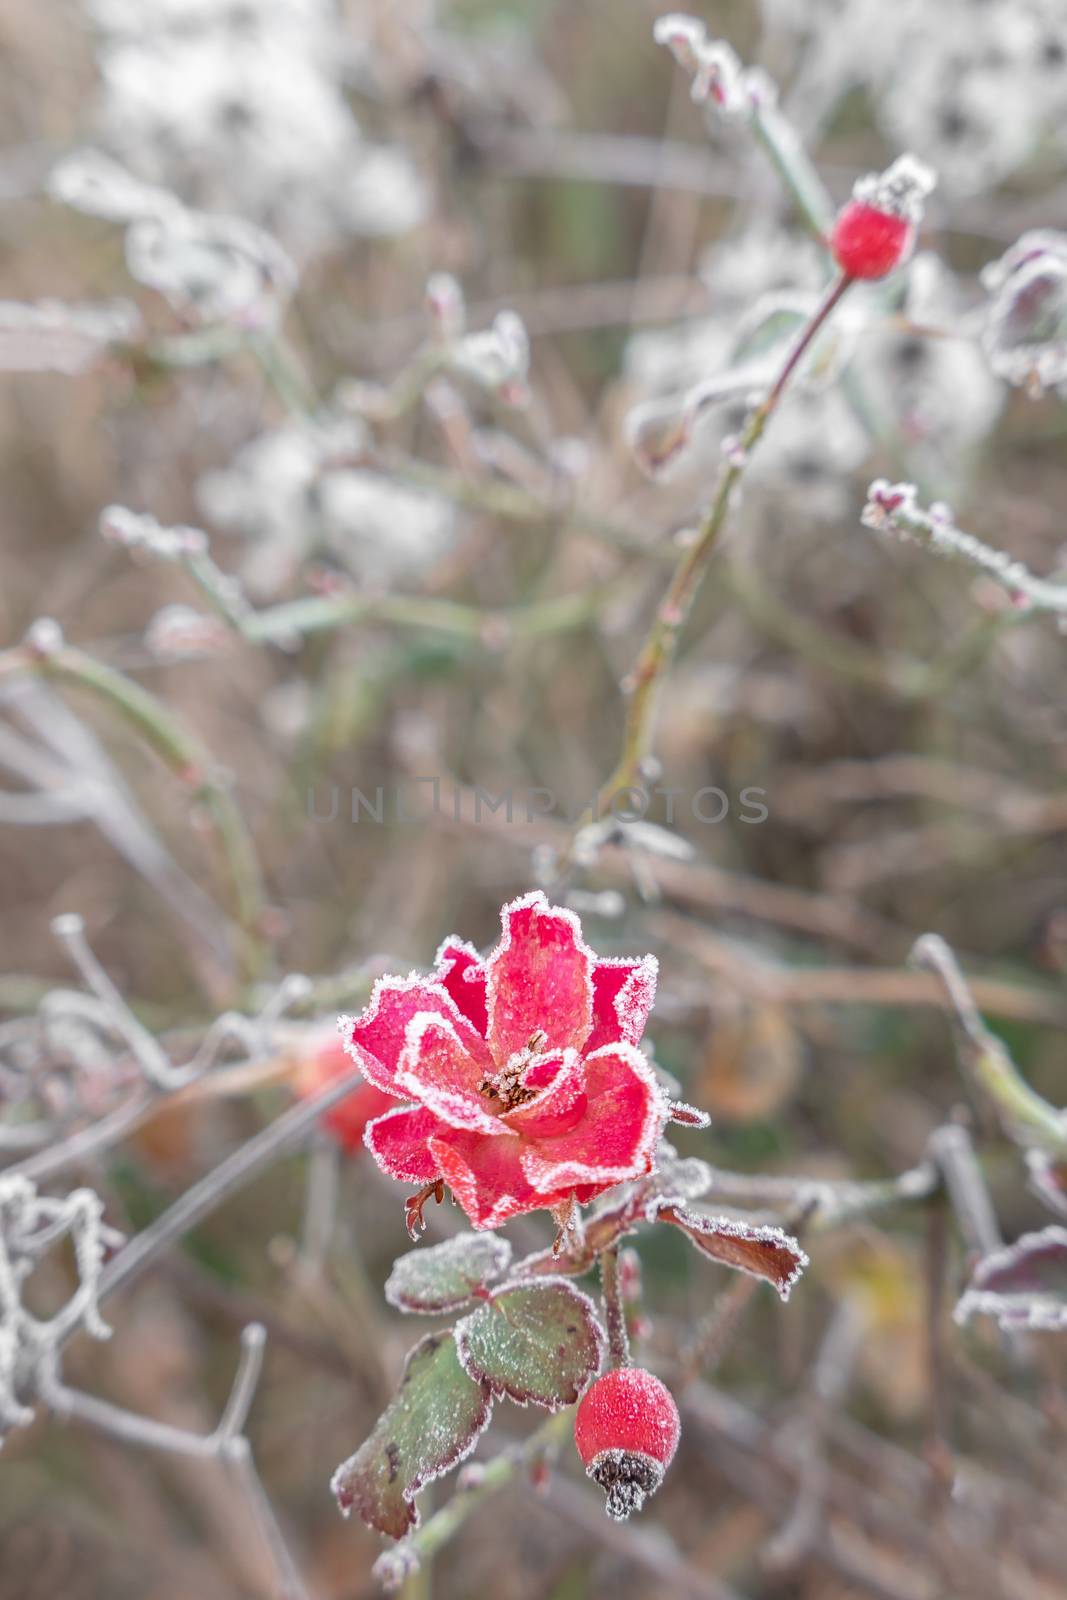 Red iced flower in exterior, with defocused blurred background.